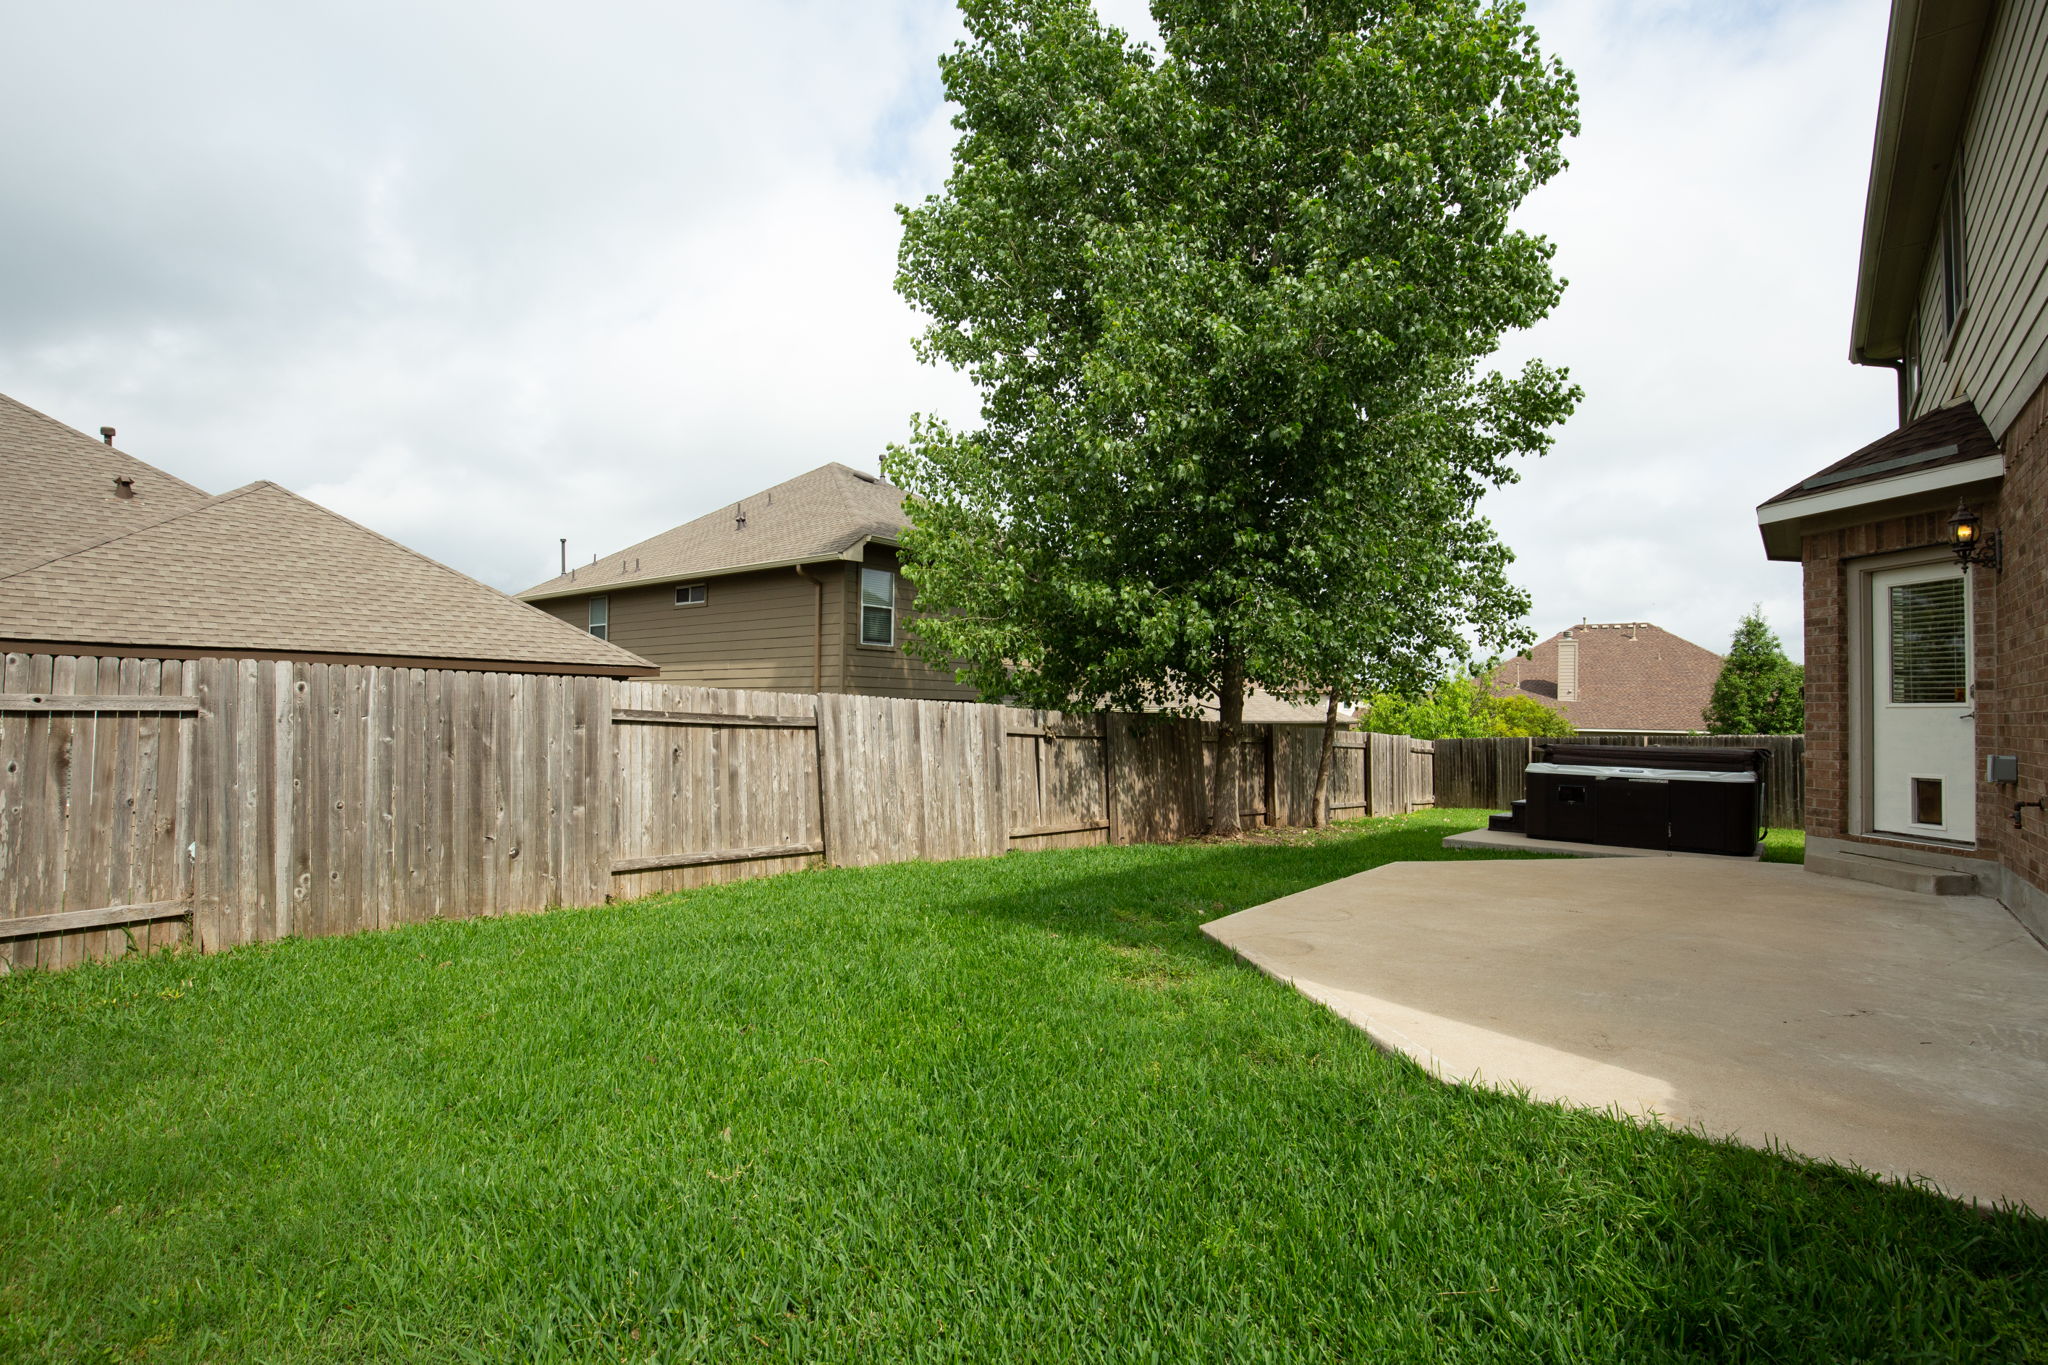  679 Rusk Rd, Round Rock, TX 78665, US Photo 26